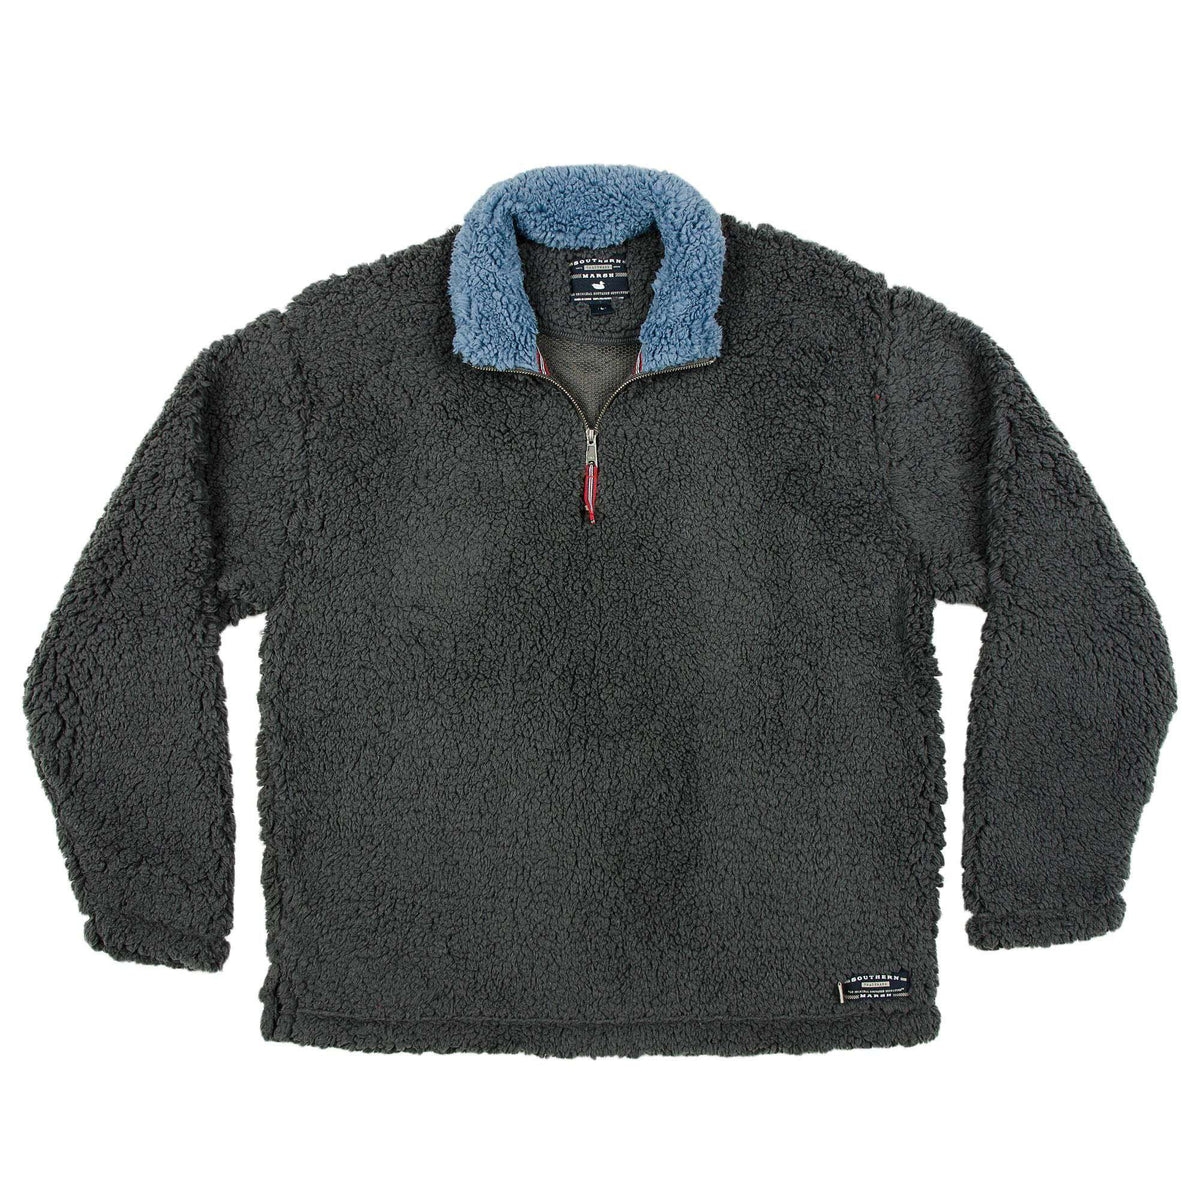 Appalachian Pile Pullover 1/4 Zip in Midnight Grey by Southern Marsh - Country Club Prep